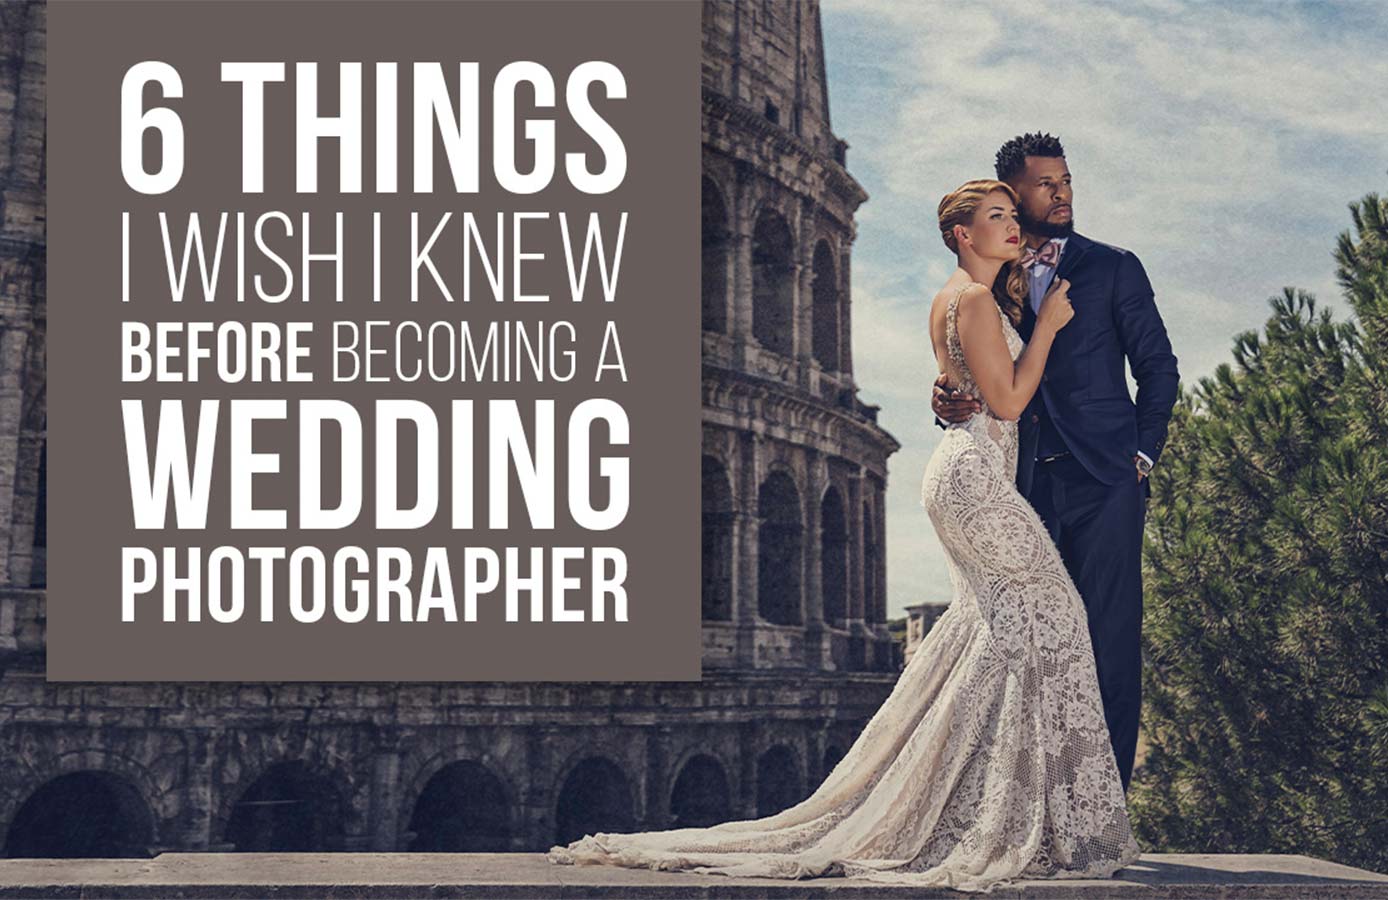 6 things i wish i knew before becoming a wedding photographer